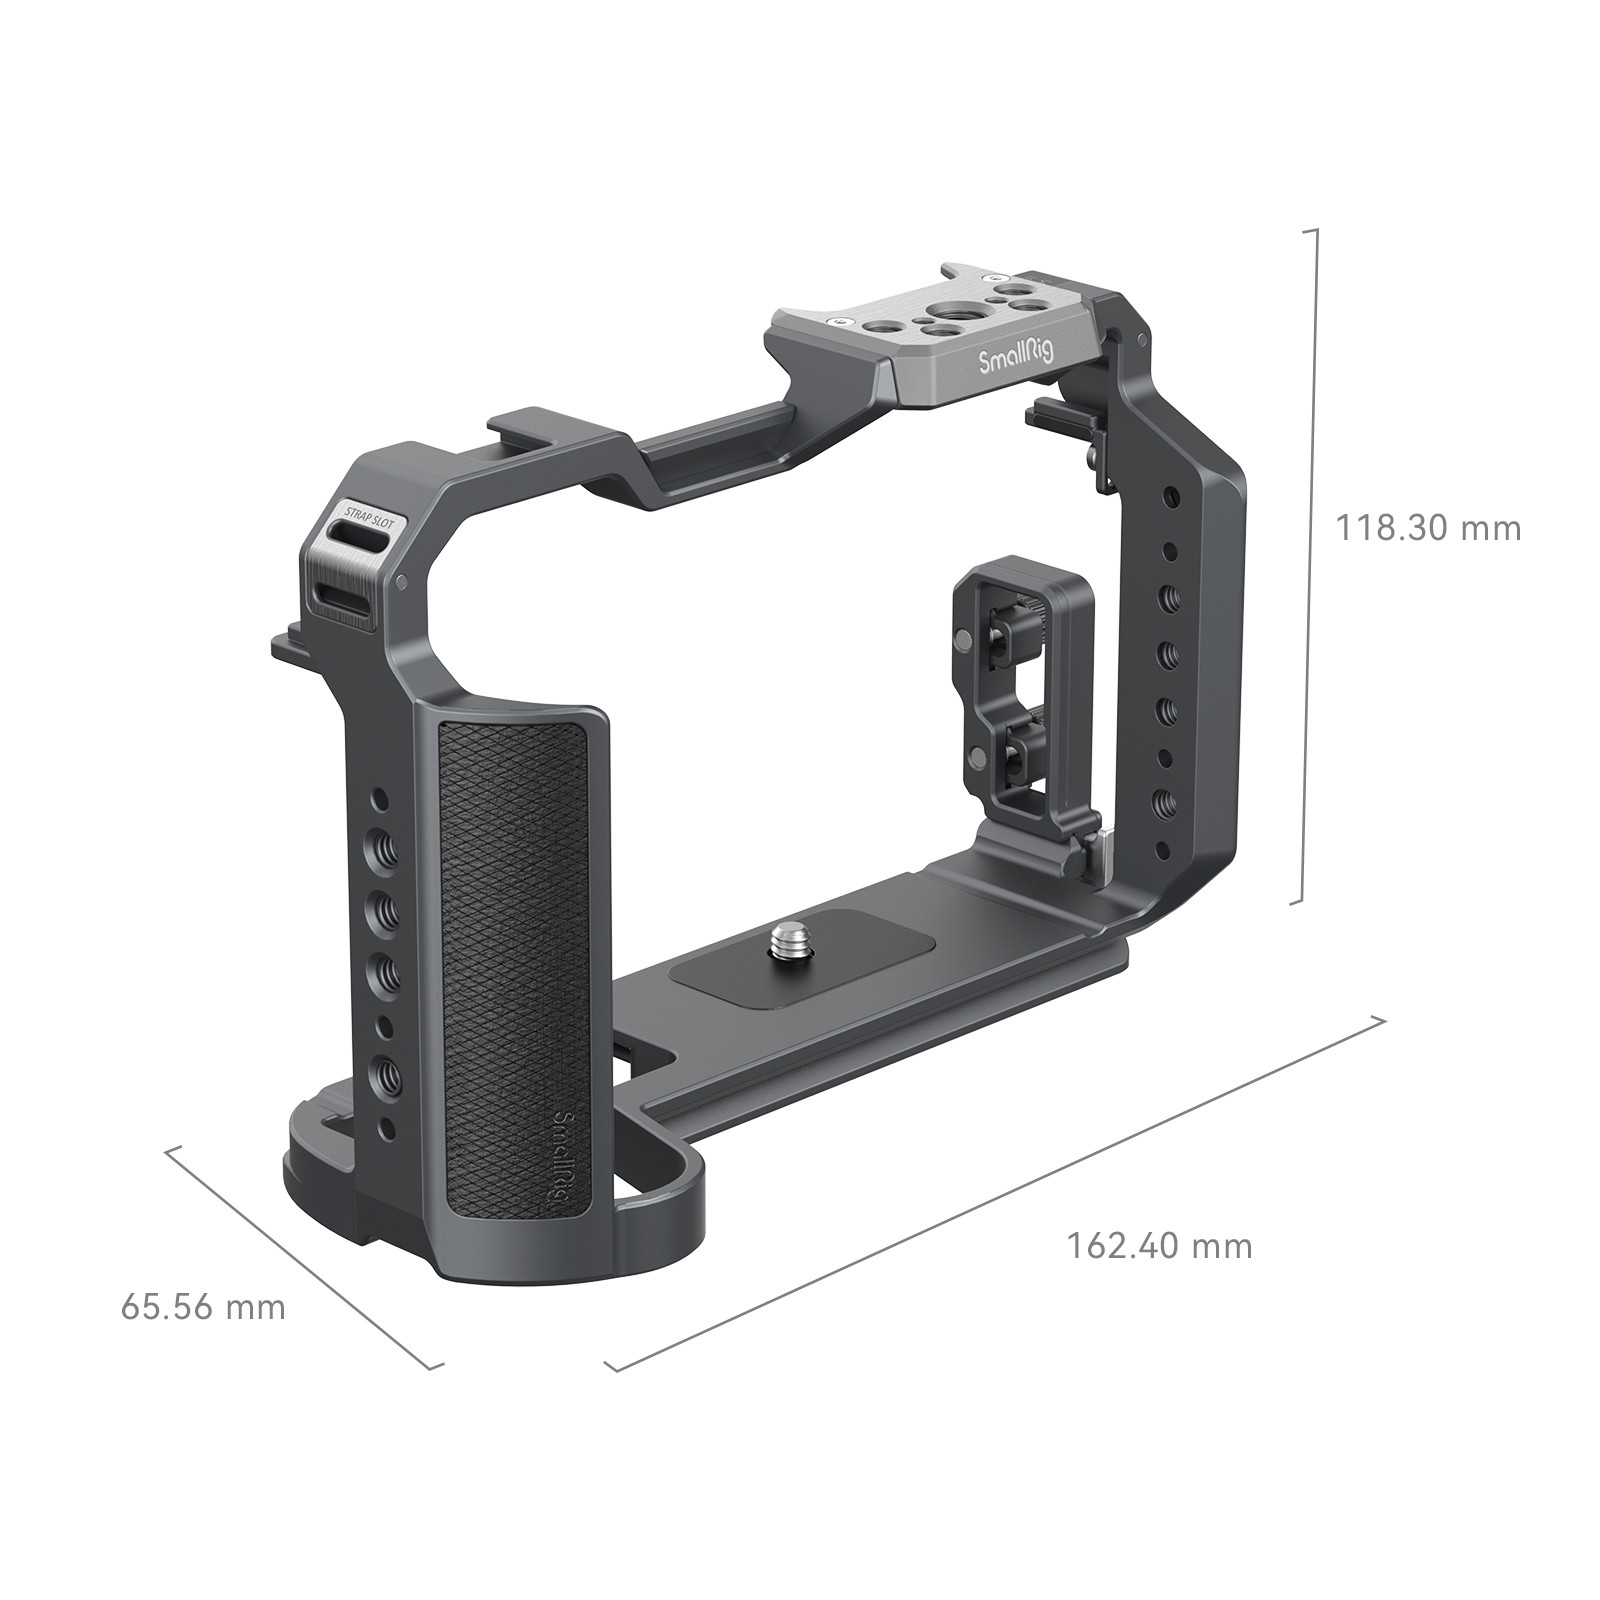 SmallRig Cage Kit for Leica SL2 / SL2-S 4162